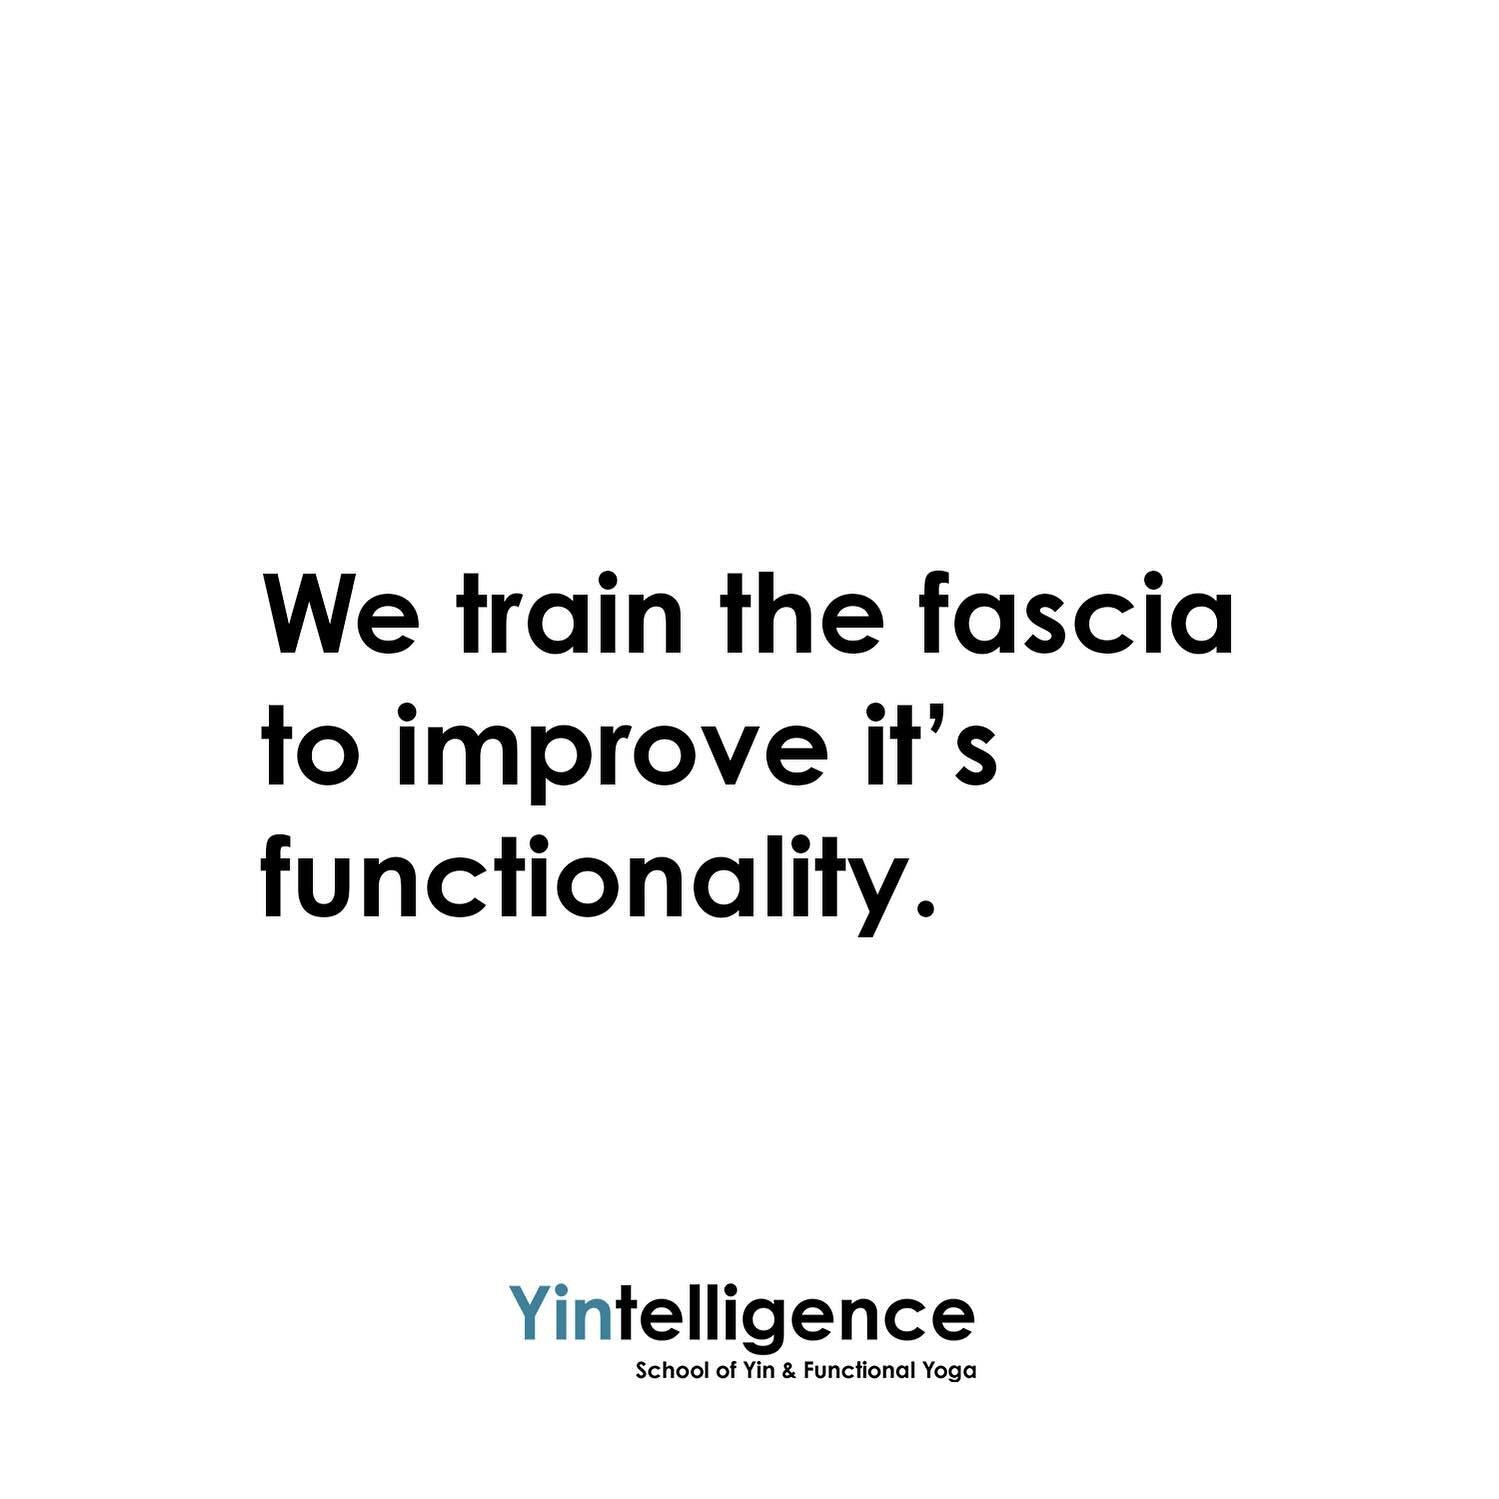 Training the fascia is extremely important, as the mechanical &lsquo;stressing&rsquo; or &lsquo;loading&rsquo; of the tissues enables the remodeling of the cellular/tissue structure. This in turn enhances the functional role of the tissue in the part